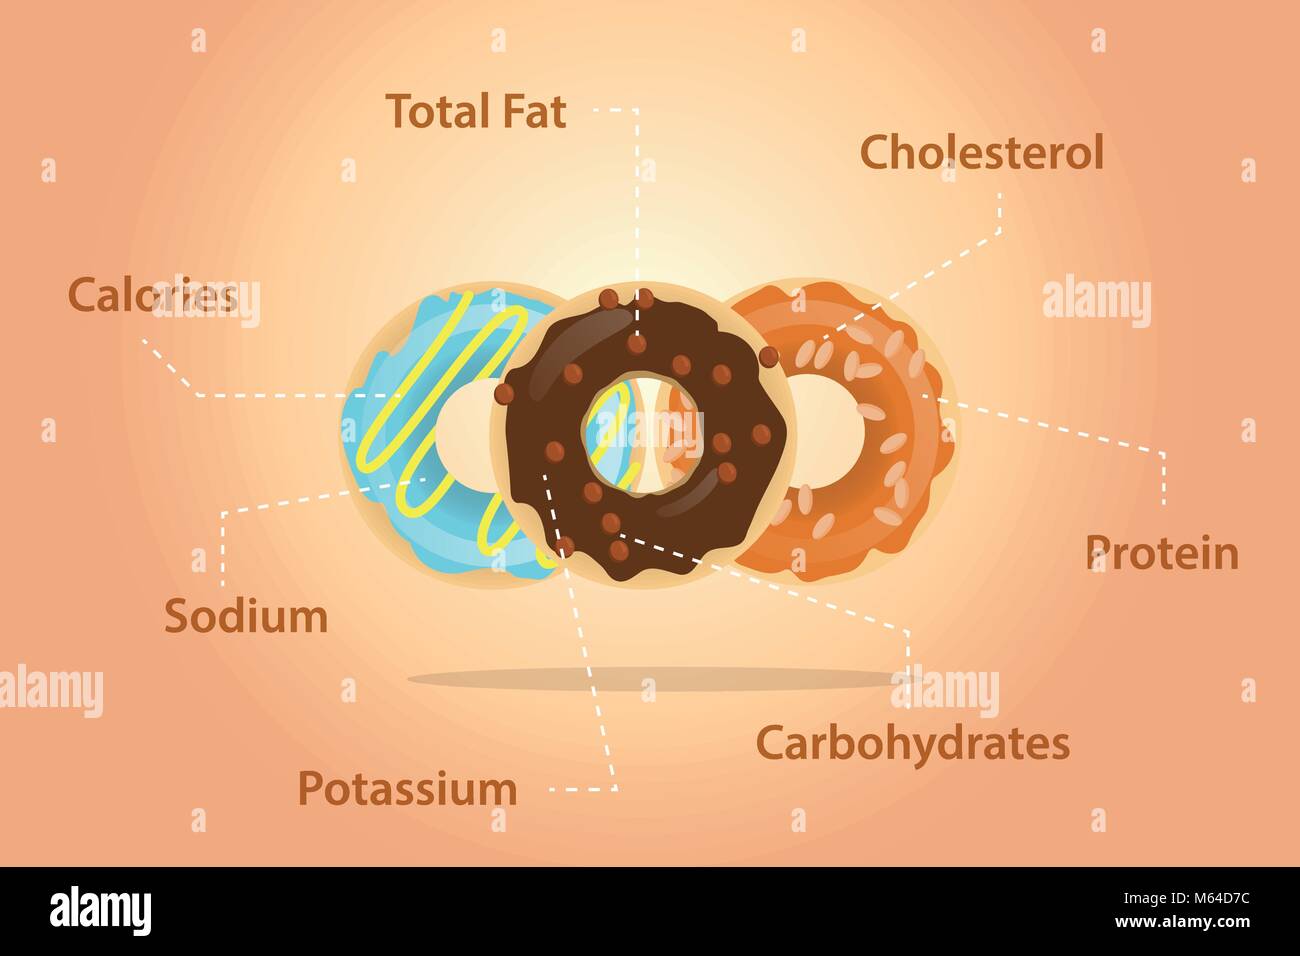 Donuts Nutrition Ingredients Detail Information Flat Stock Vector Image